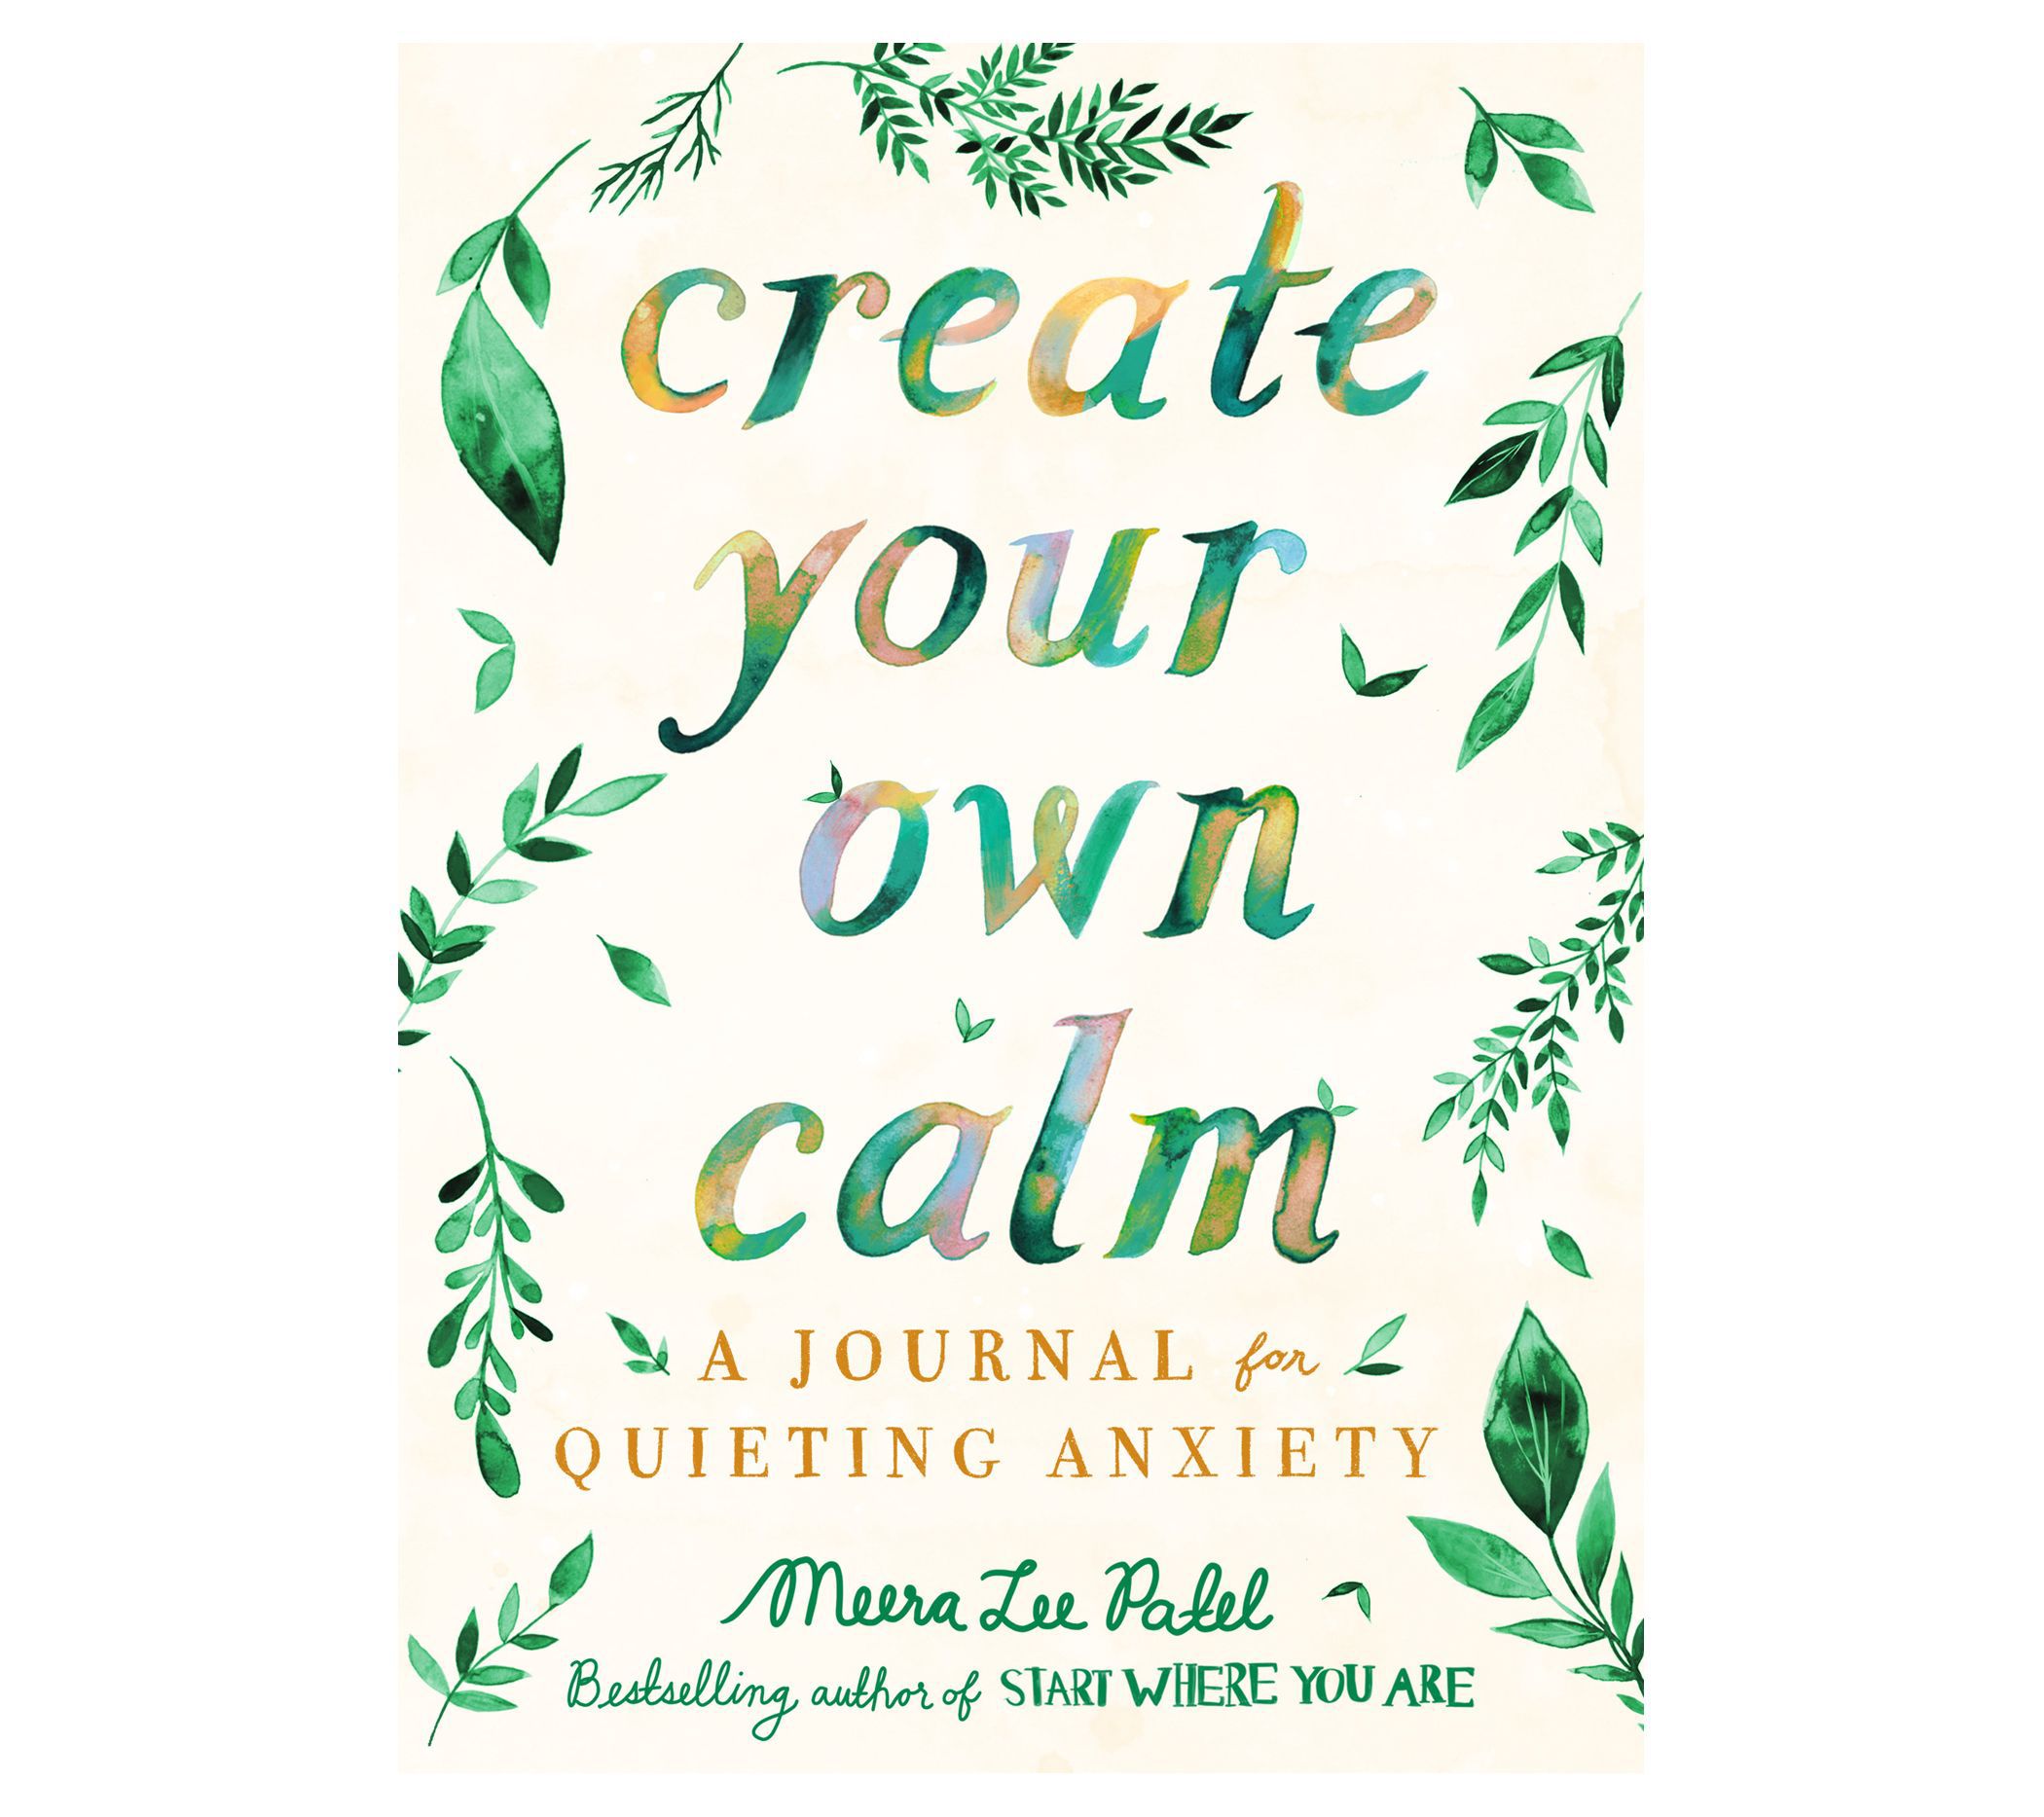 Create Your Own Calm by Meera Lee Patel 